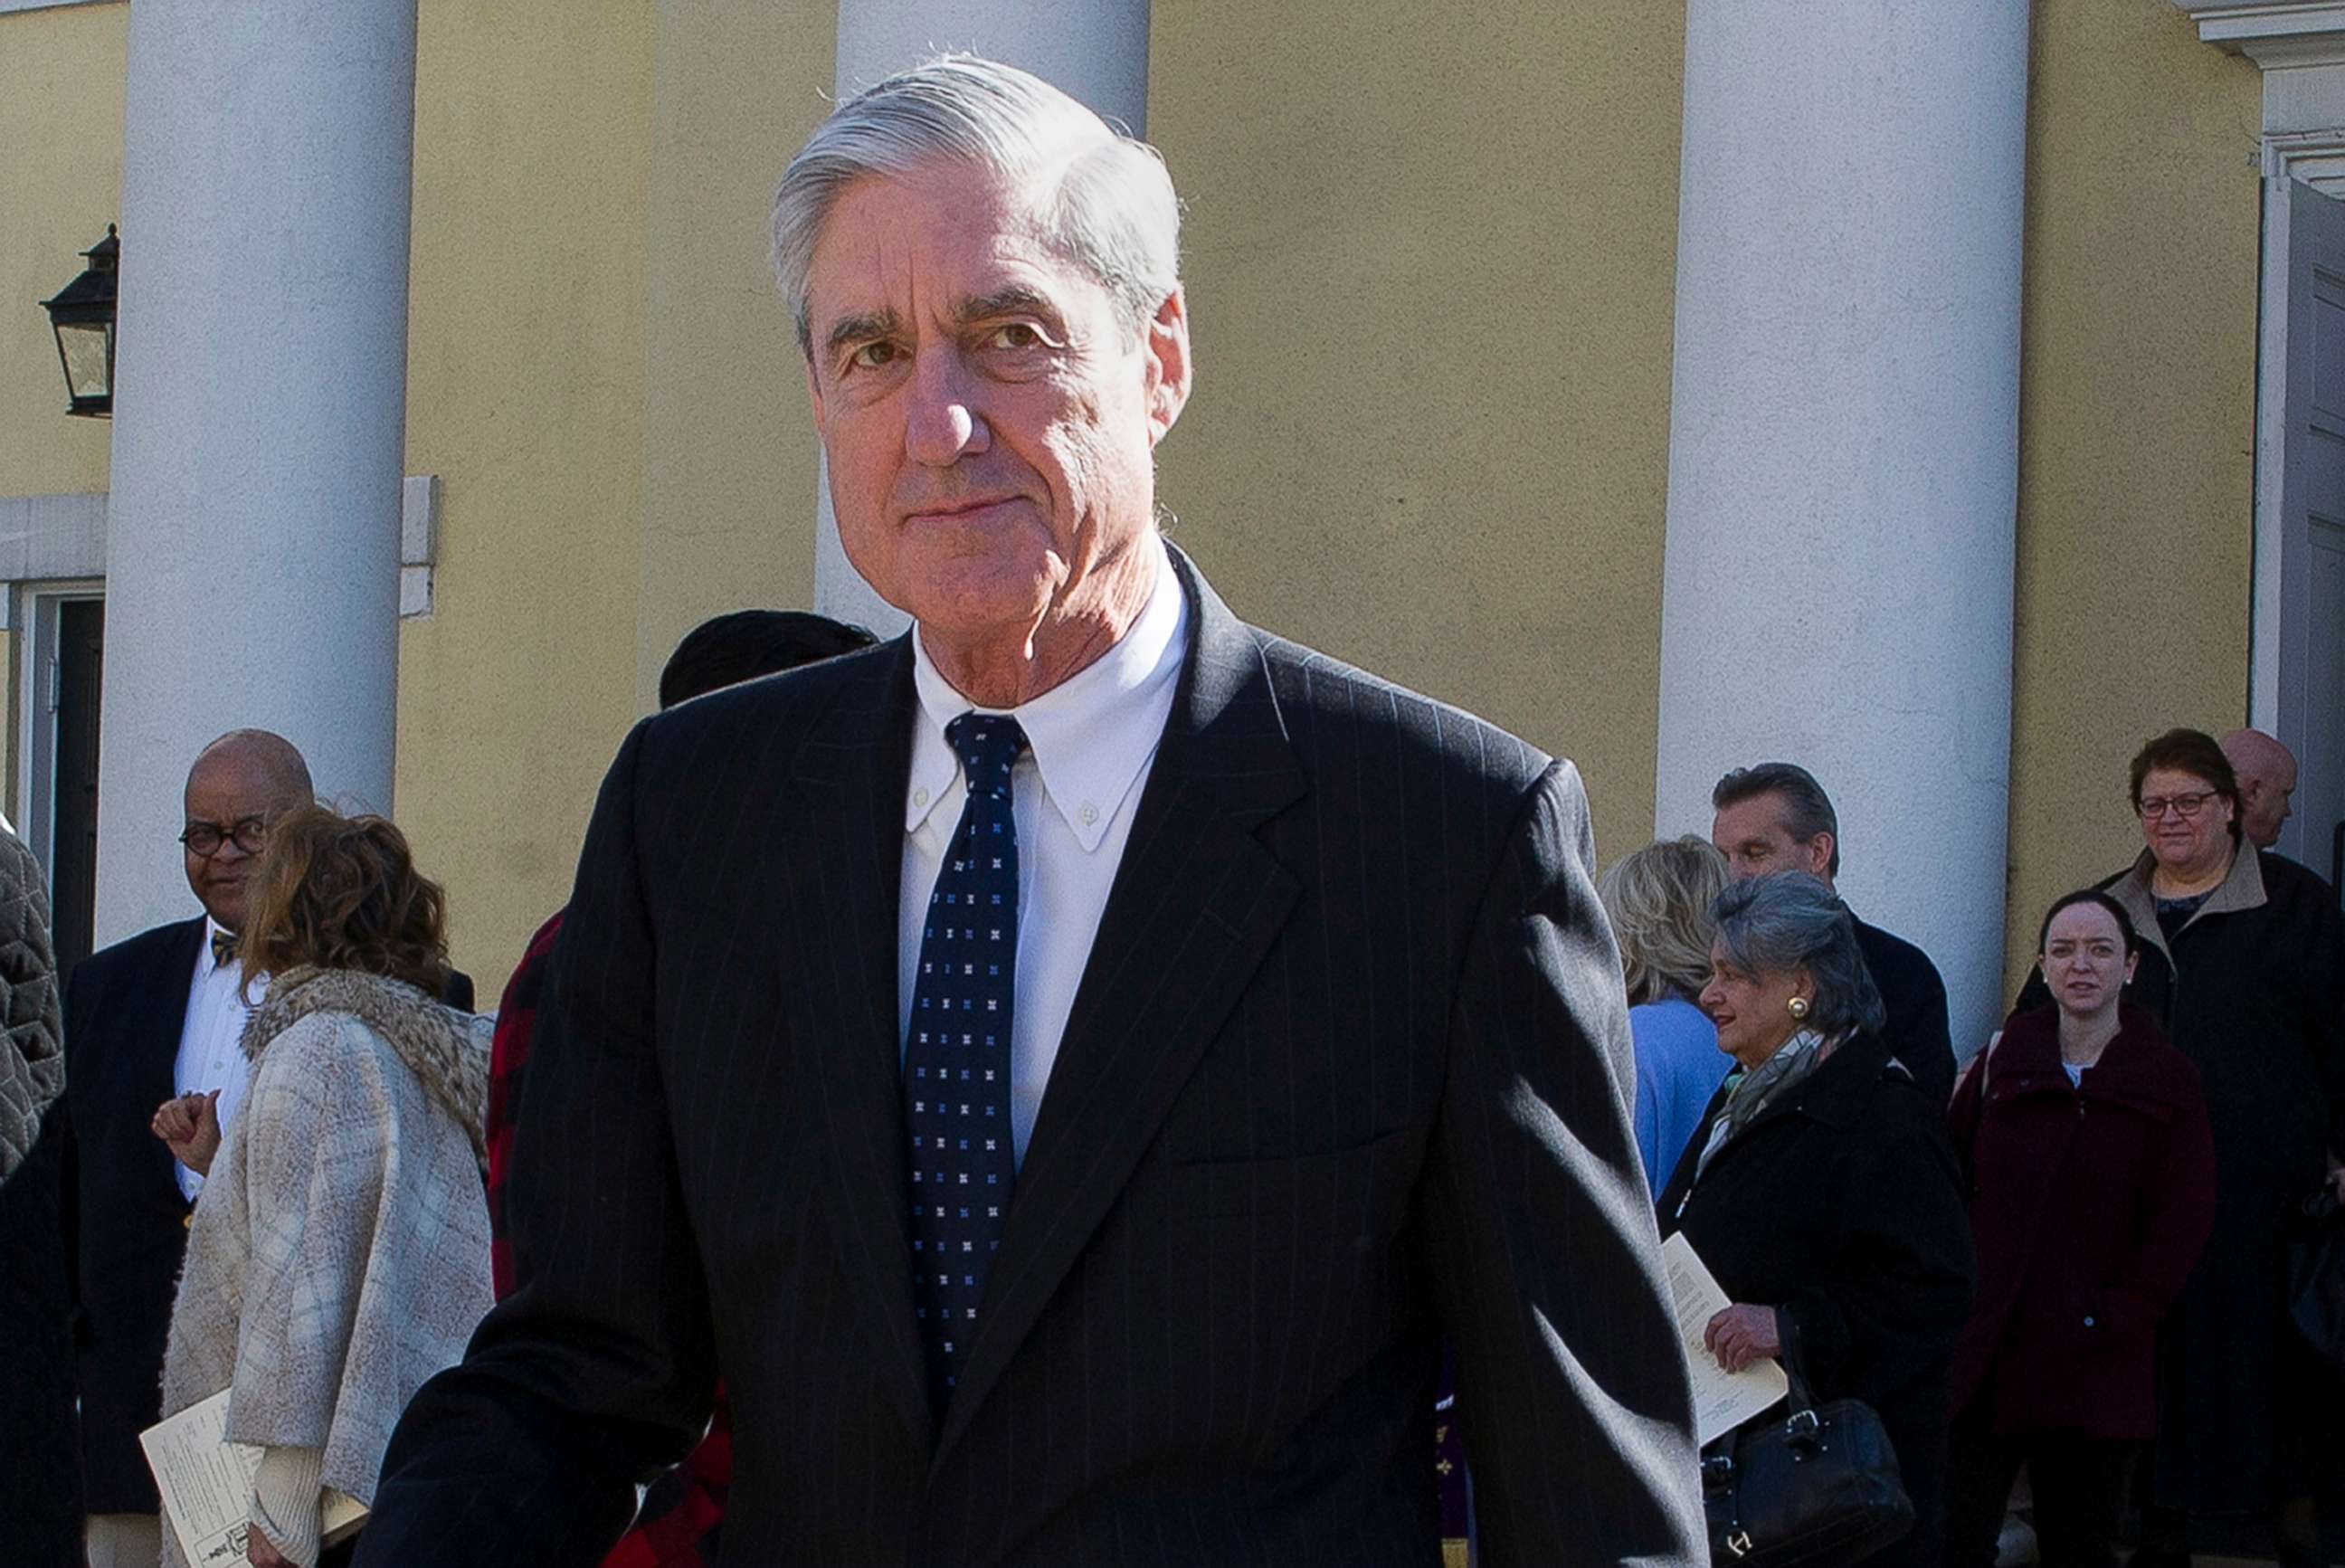 PHOTO: Special counsel Robert Mueller leaves following a Sunday morning church service across from the White House in Washington, D.C, March 24, 2019.